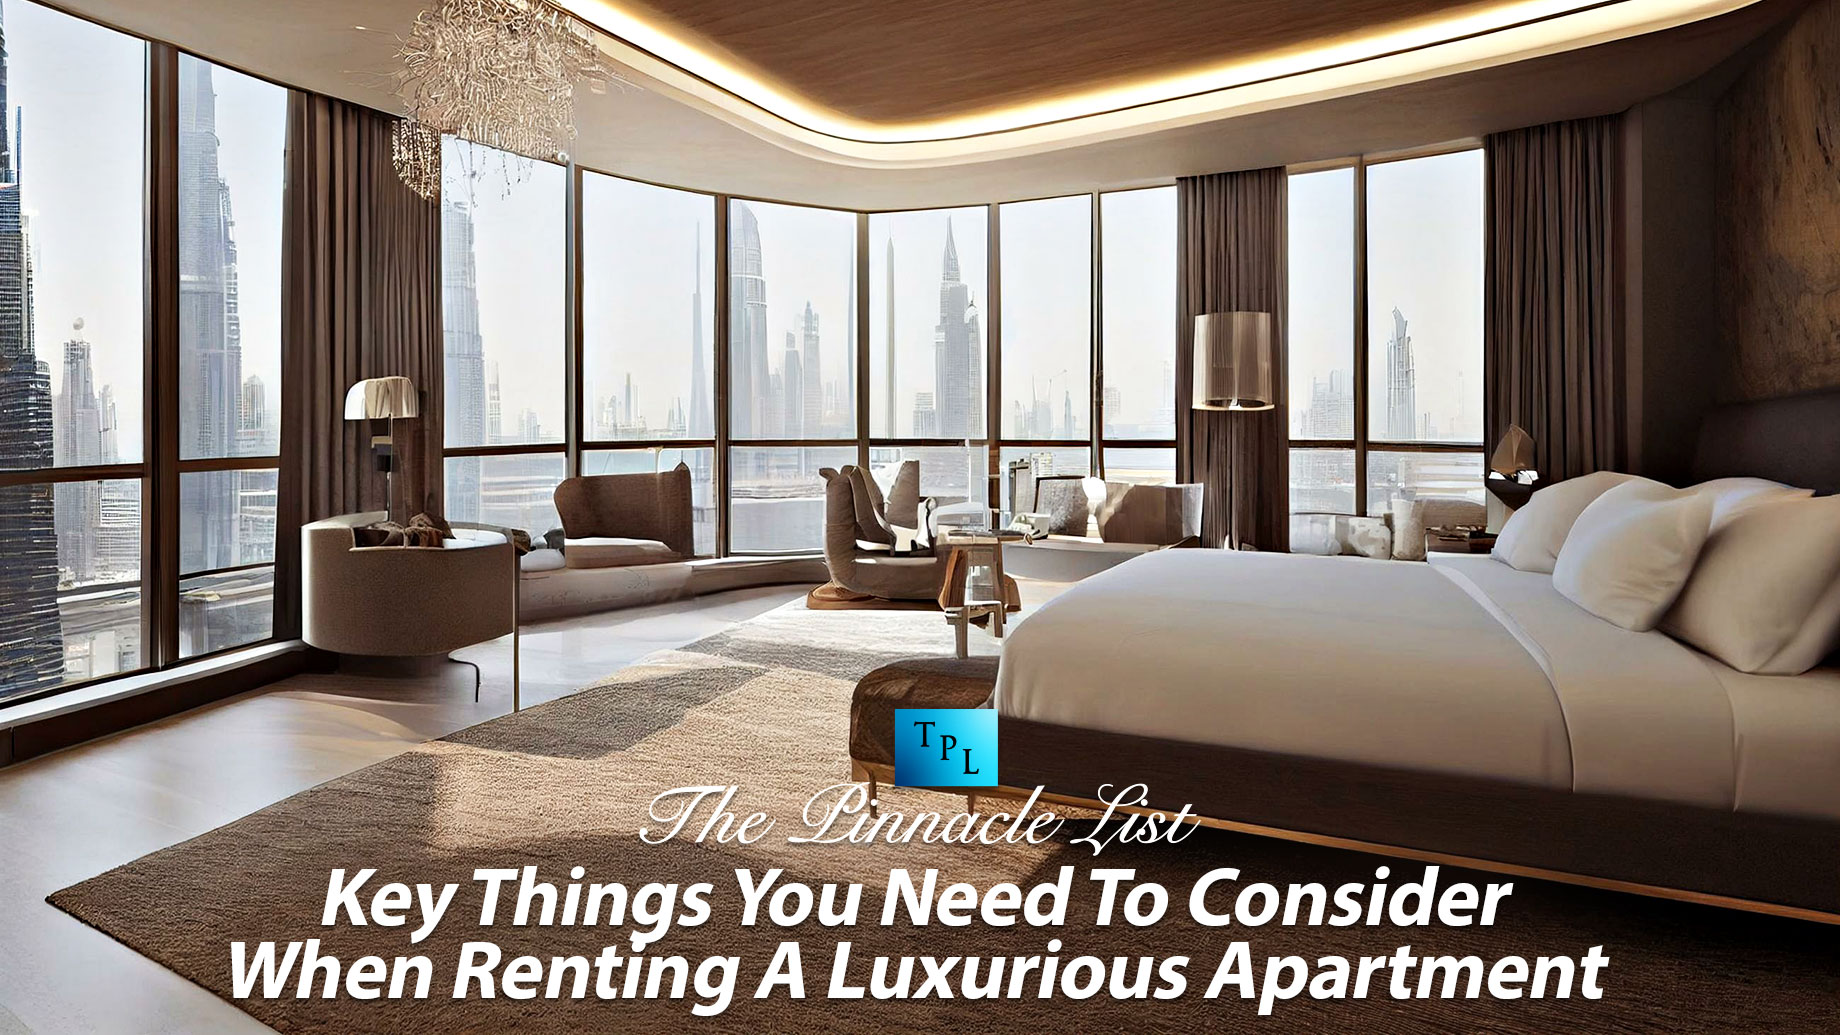 Key Things You Need To Consider When Renting A Luxurious Apartment